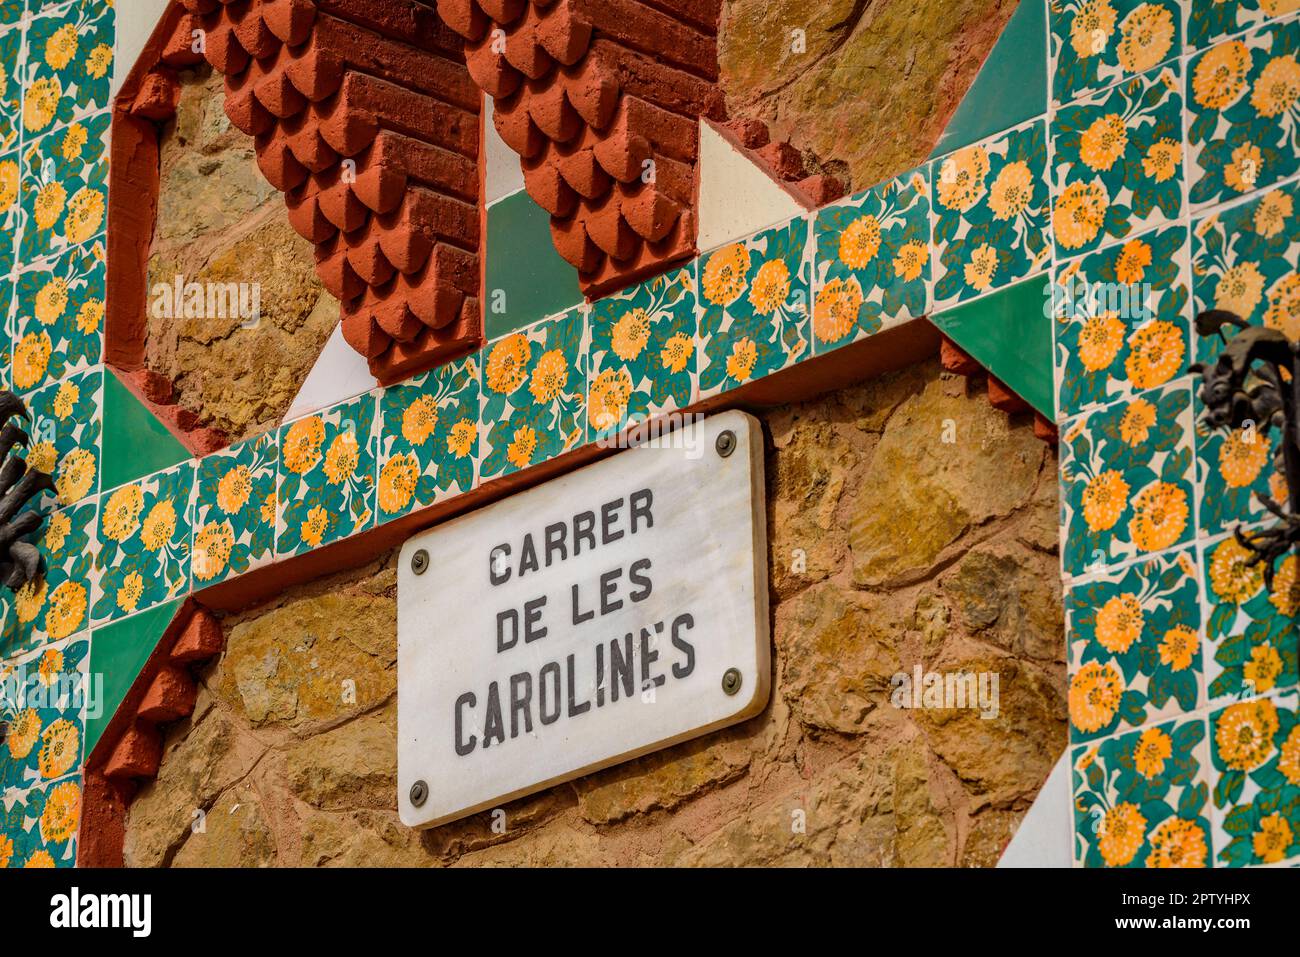 Detail of the exterior facade of the Casa Vicens, designed by Antoni Gaudí, with the sign of the Carolines street (Barcelona, Catalonia, Spain) Stock Photo